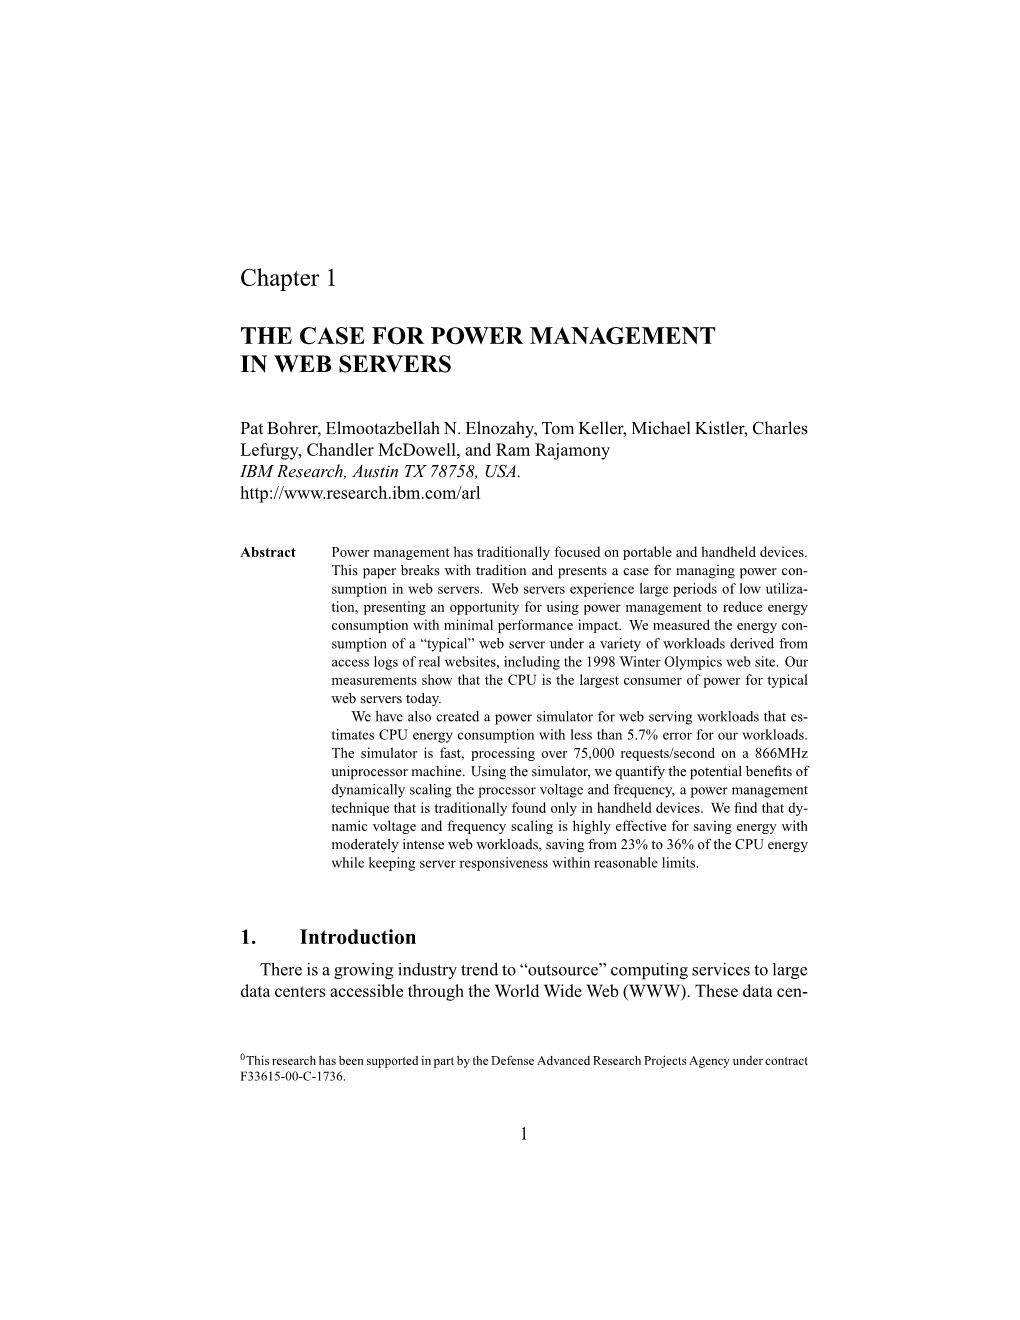 Chapter 1 the CASE for POWER MANAGEMENT in WEB SERVERS